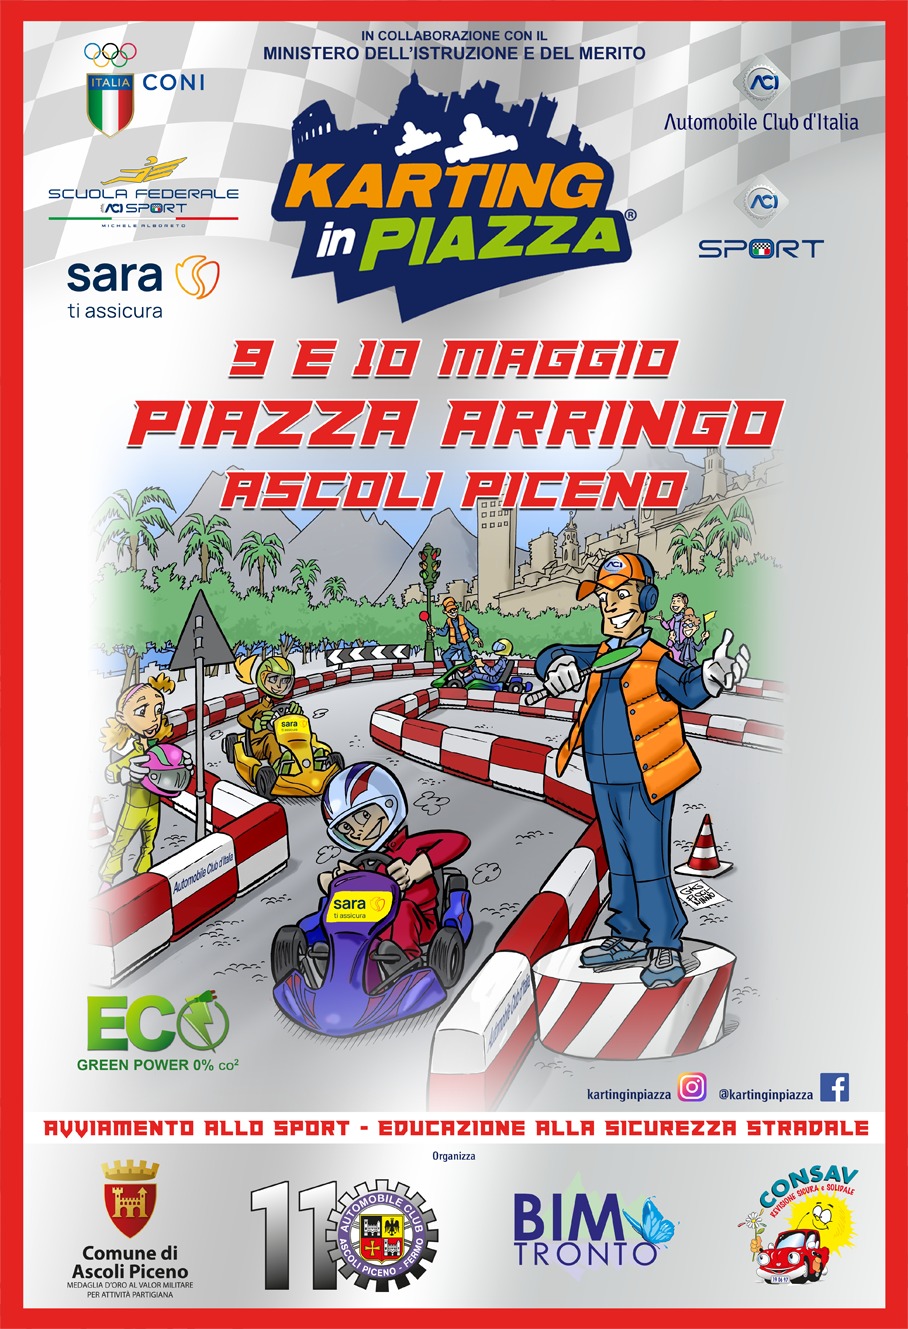 KARTING IN PIAZZA